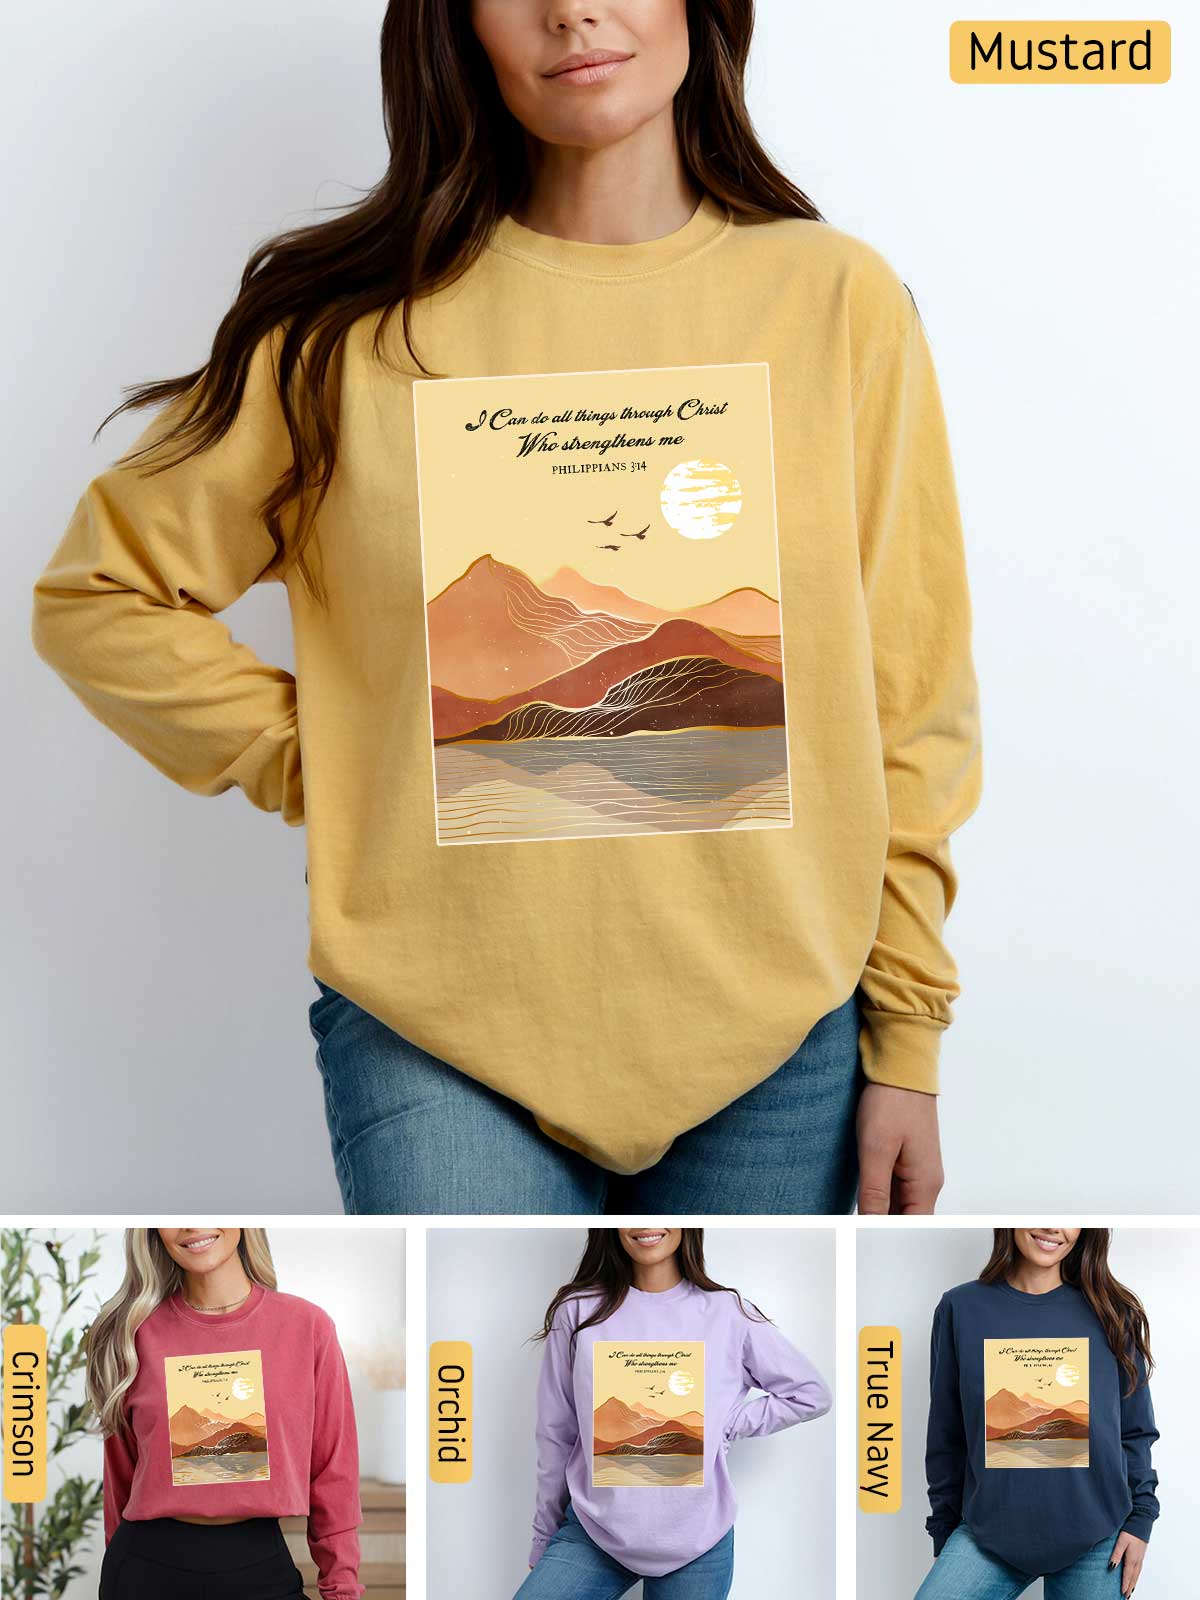 a woman wearing a mustard colored sweatshirt with mountains on it